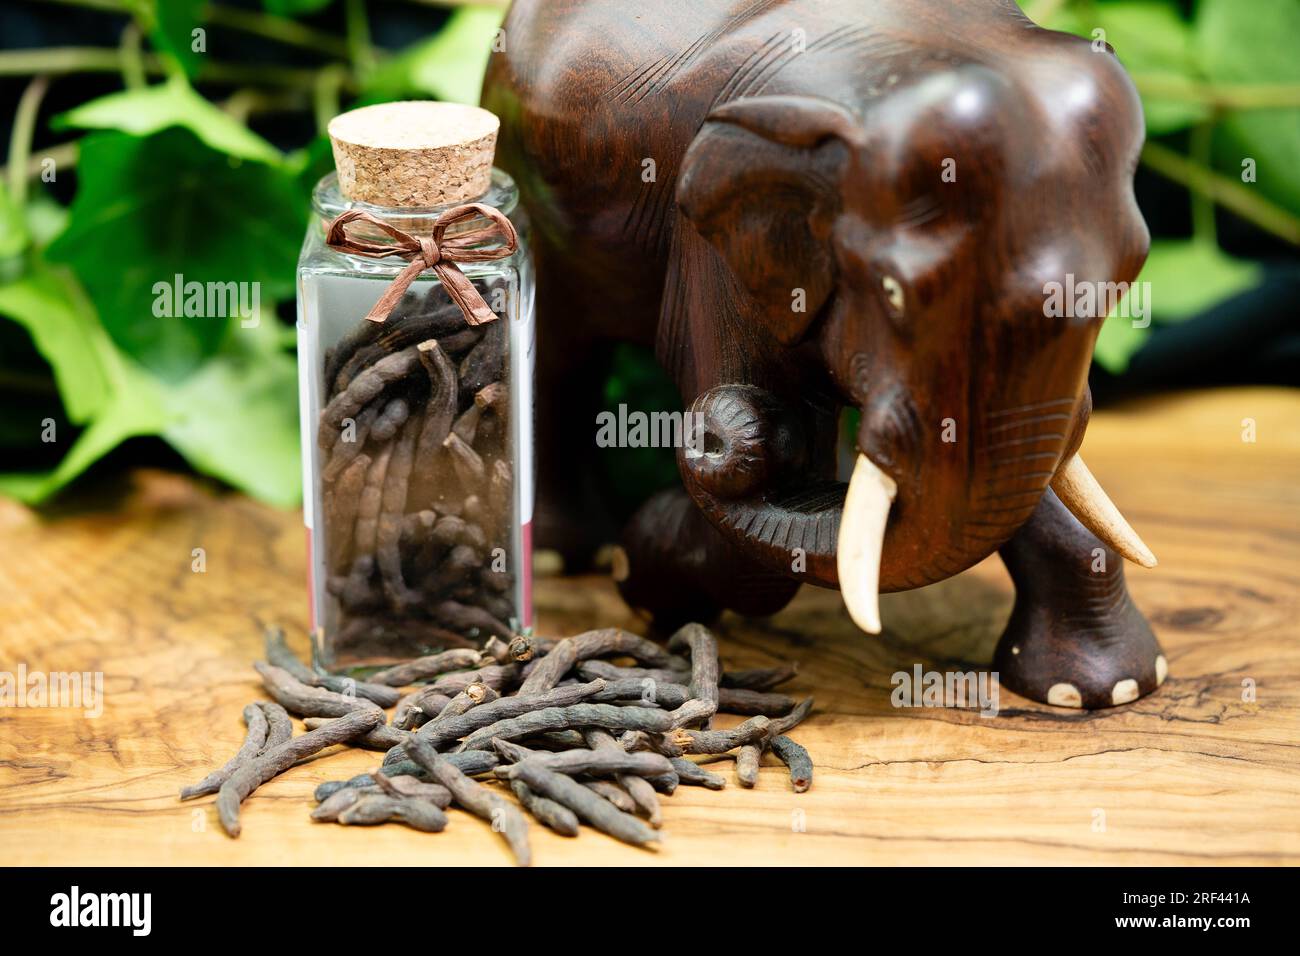 Black long pepper xylopia aethiopica on olive wood Stock Photo